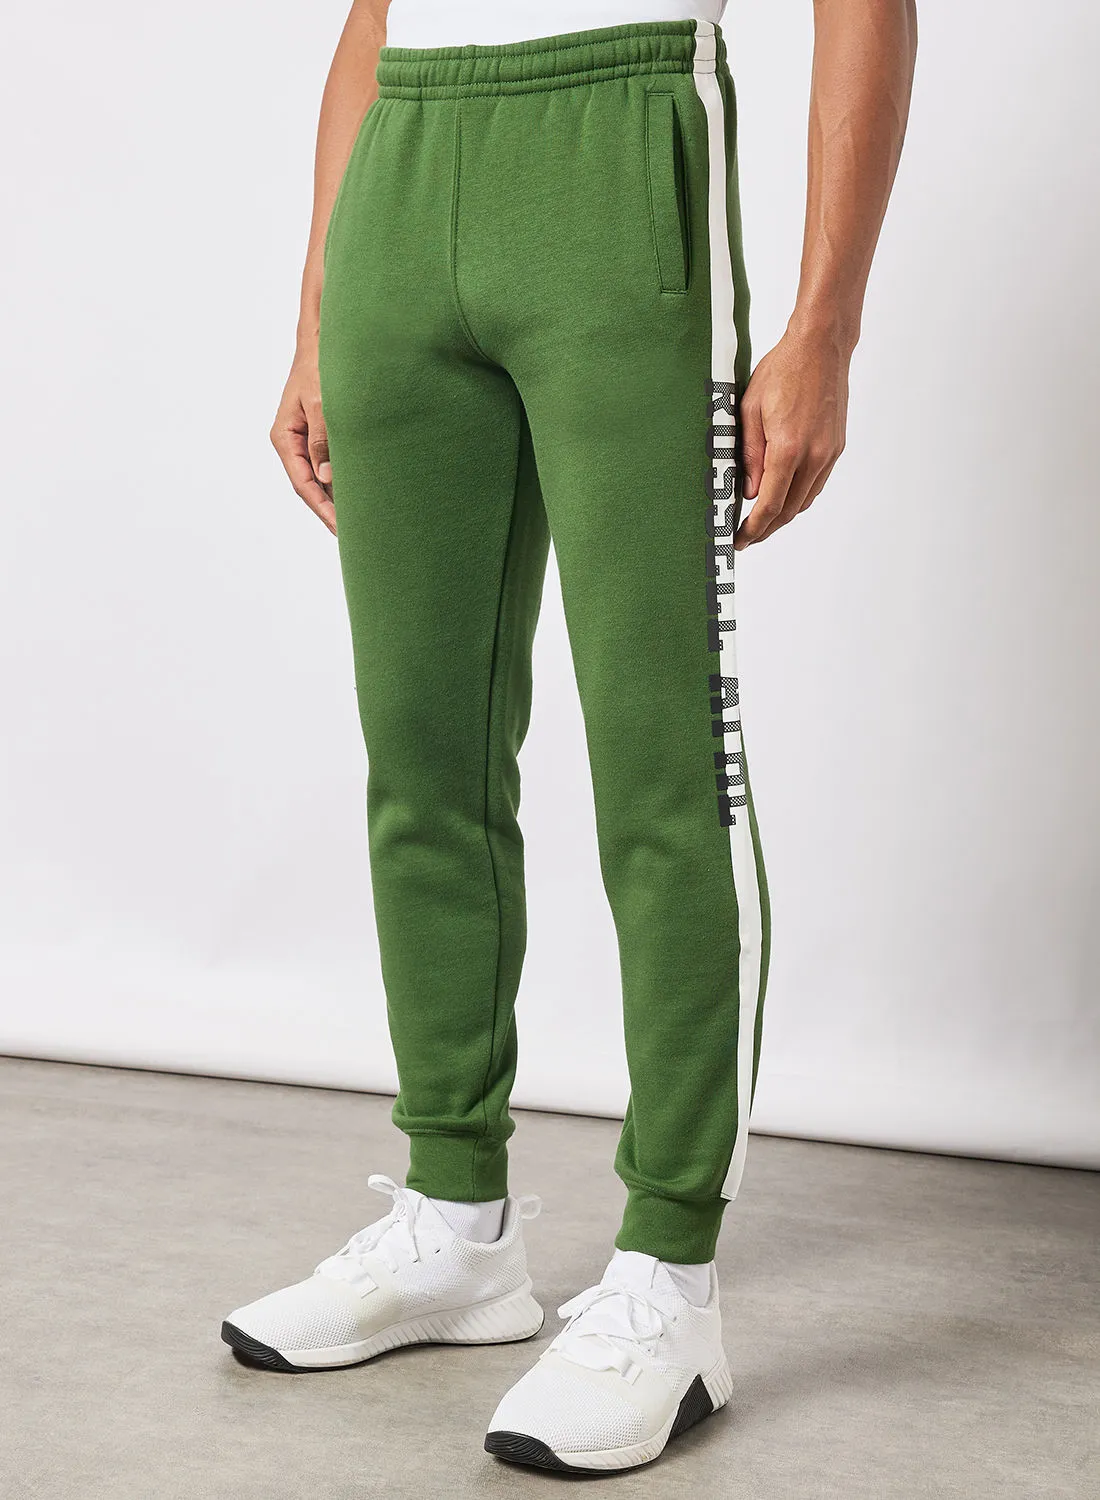 Russell Athletic Contrast Stripe Sweatpants Green